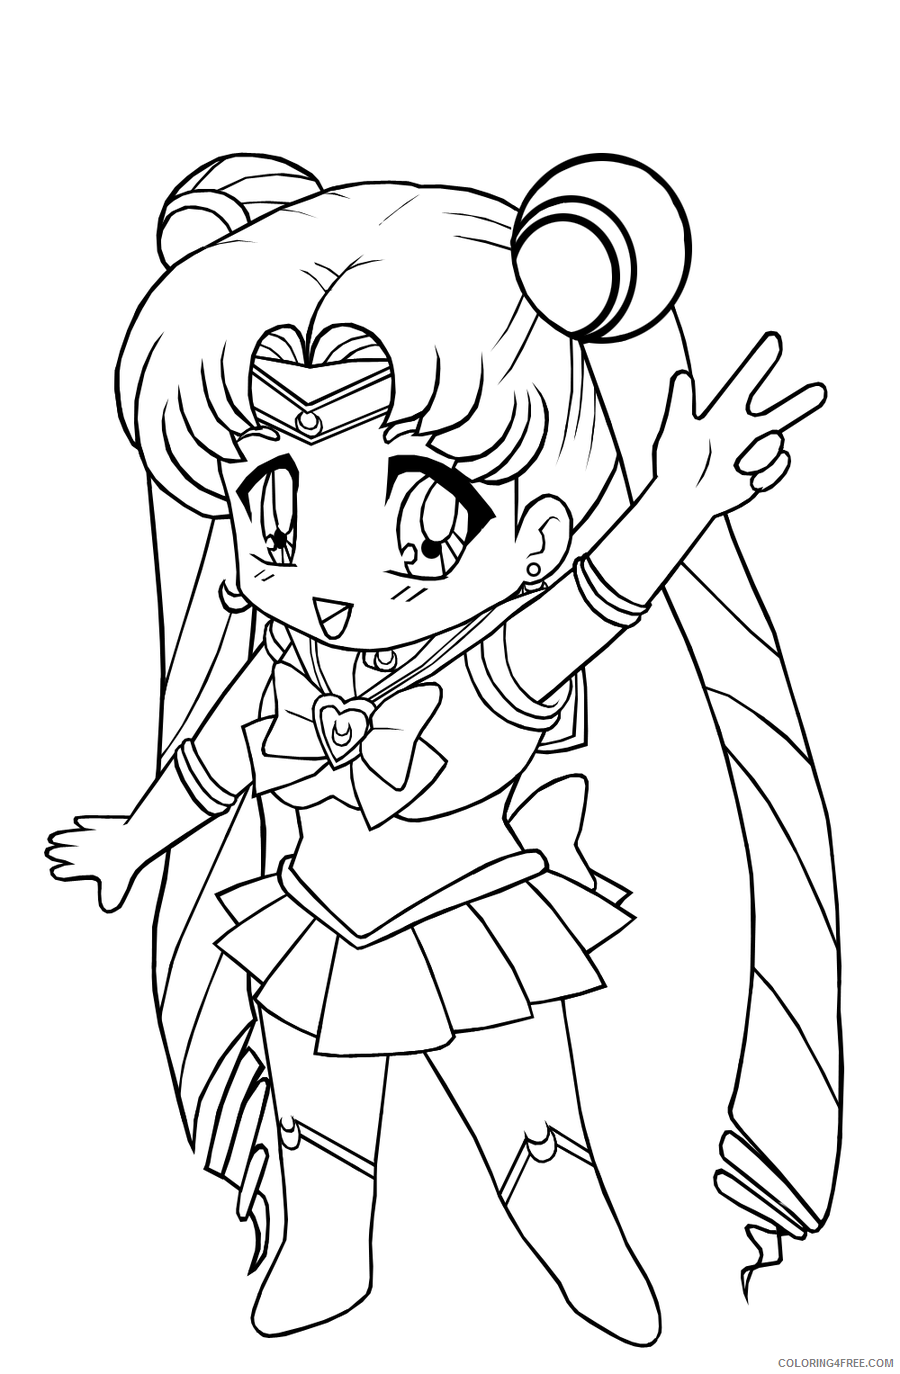 Chibi Printable Coloring Pages Anime Chibi For Kids 2021 0085 Coloring4free